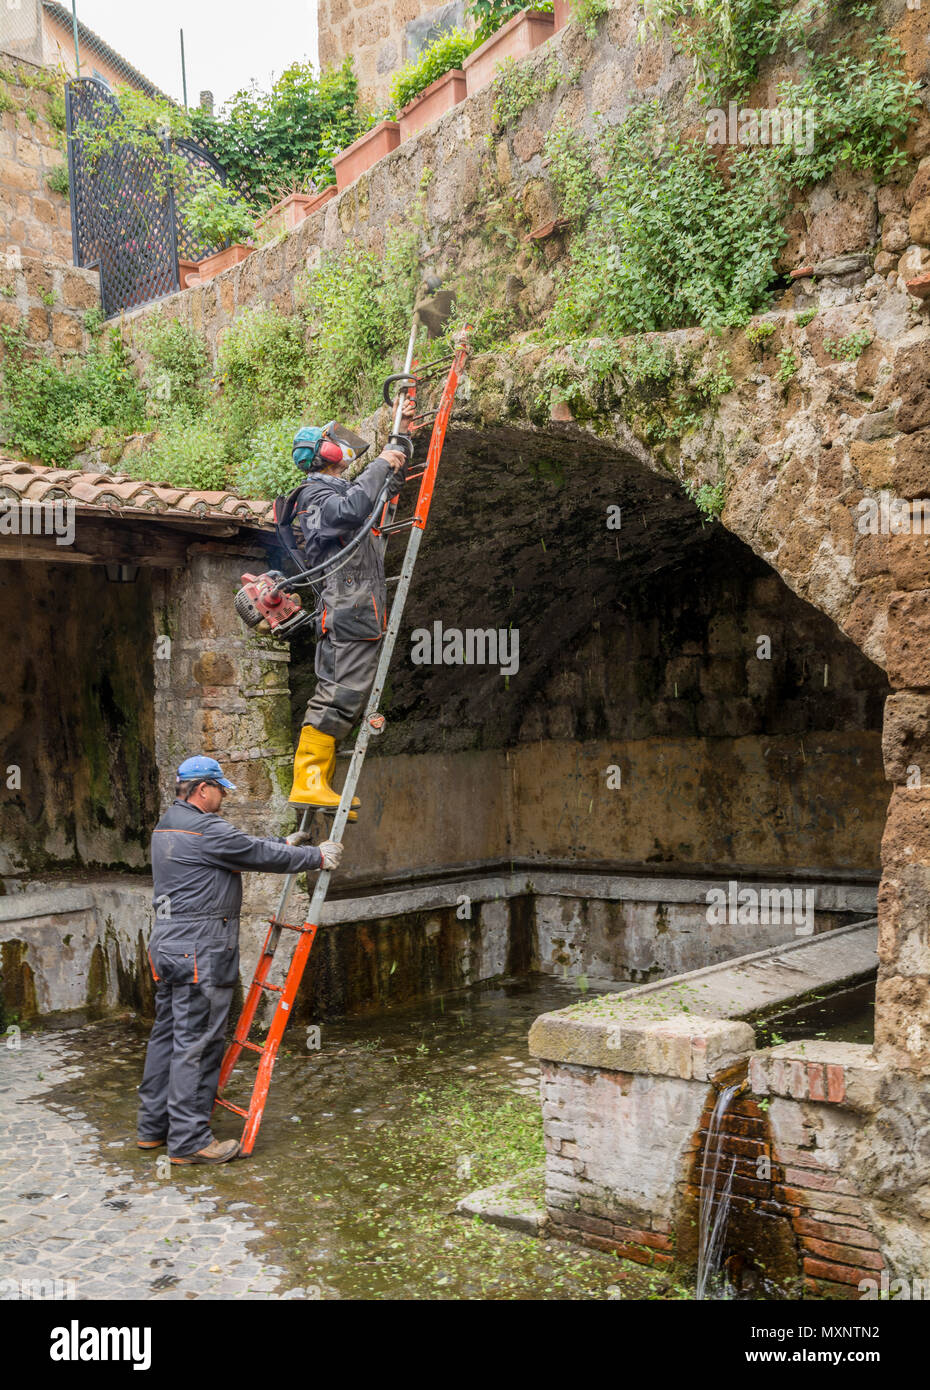 Tuscania (Viterbo), Italy - May 2, 2018: municipal gardener using strimmer in an archaeological site in Tuscania, italy Stock Photo